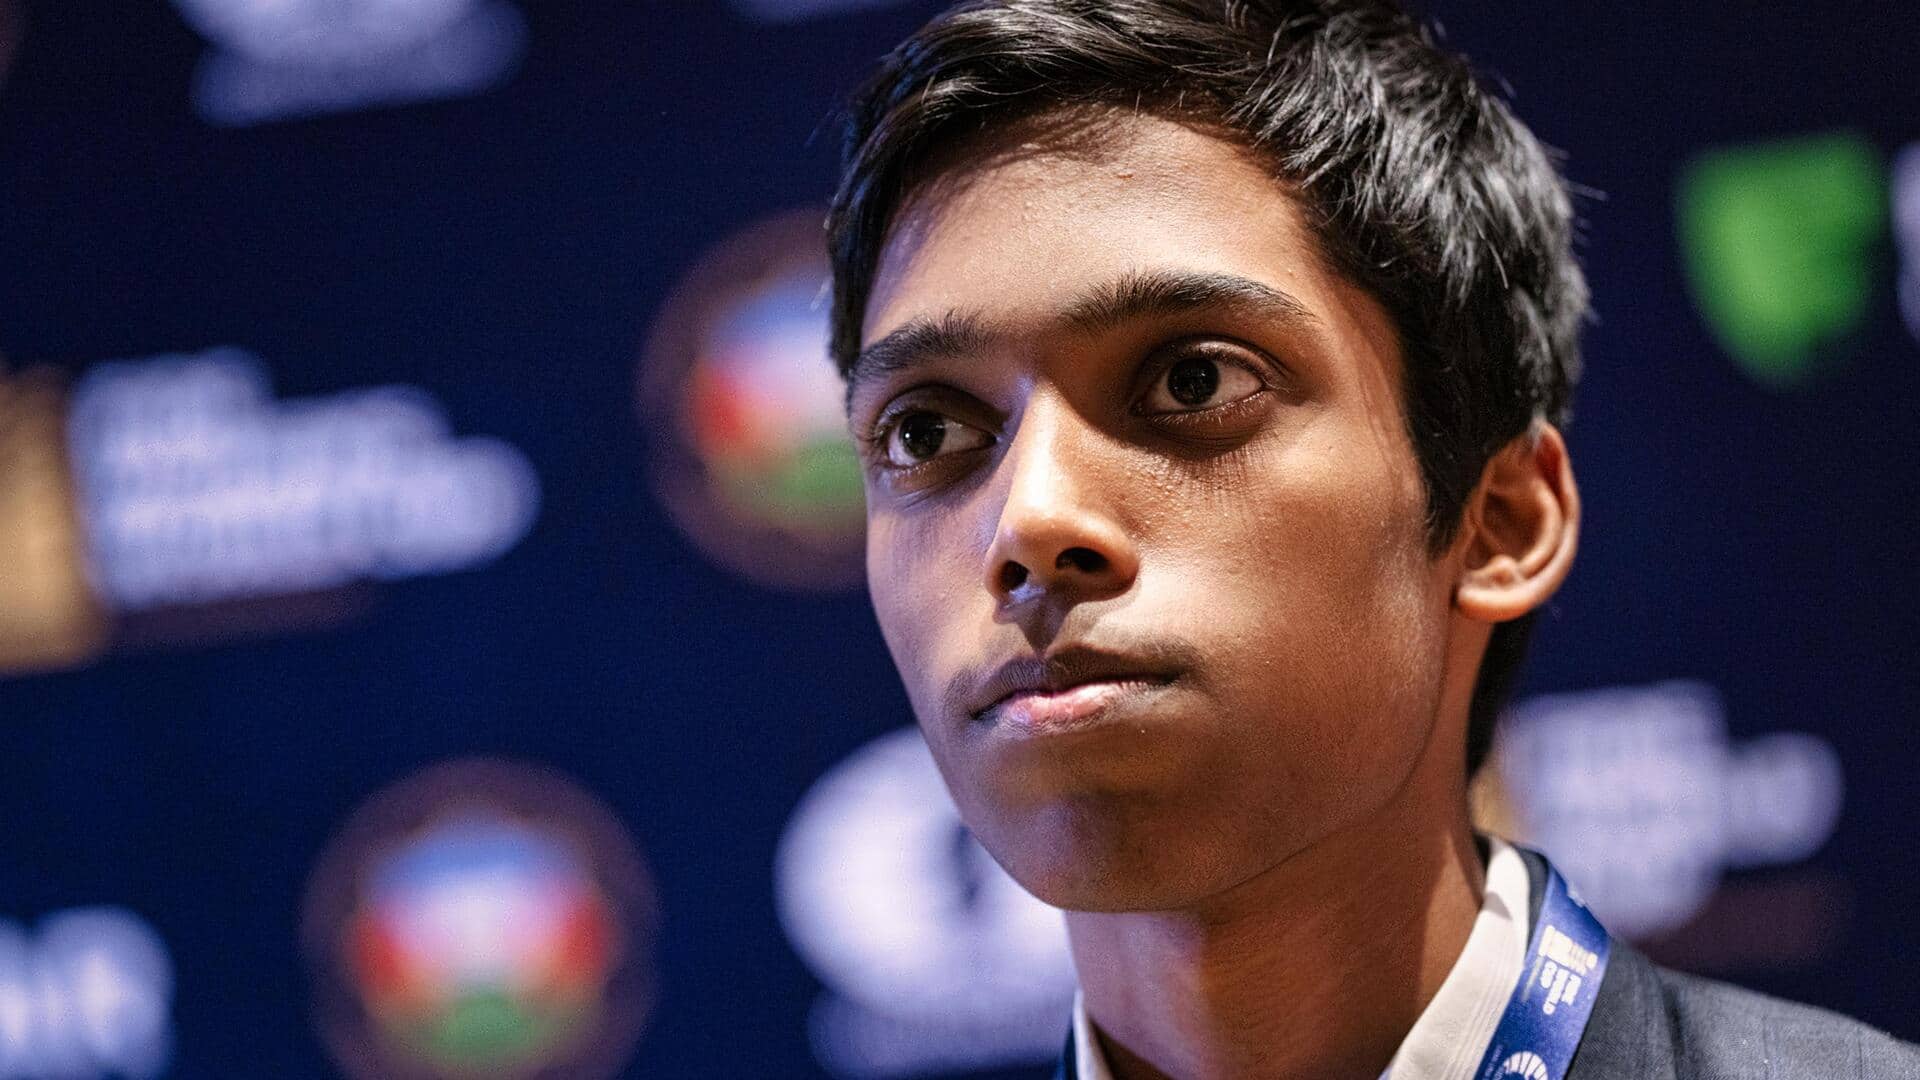 Praggnanandhaa Becomes 2nd Youngest GM In History 